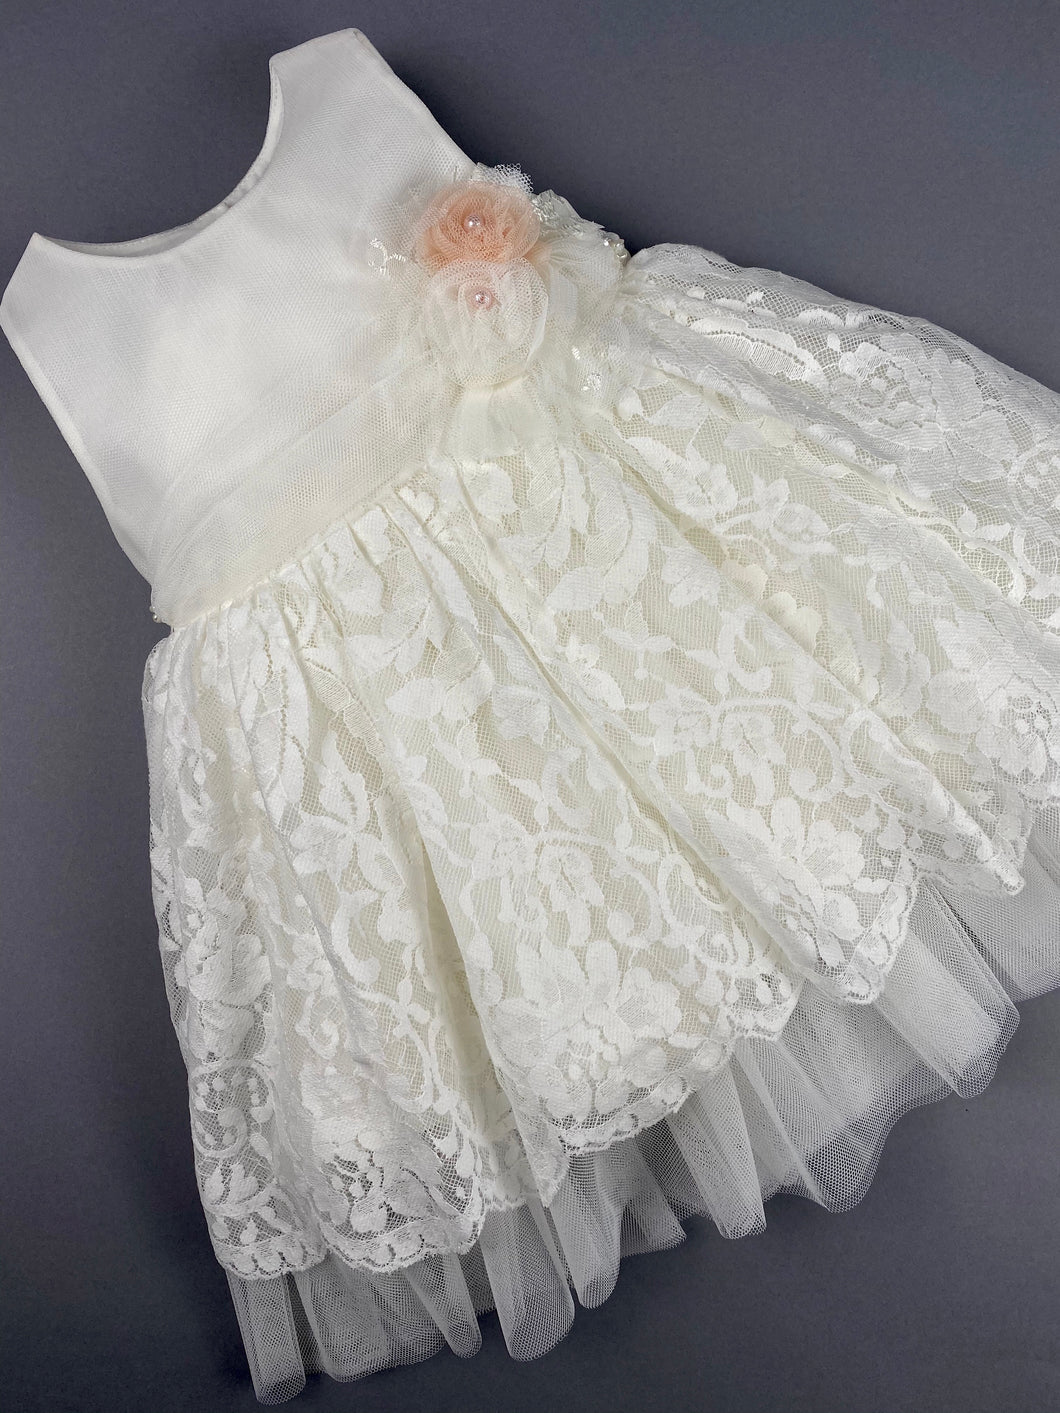 Dress 21 Girls Baptismal Christening Sleeveless  3pc Lace Embroidered Dress, with matching Bolero and Hat. Made in Greece exclusively for Rosies Collections.